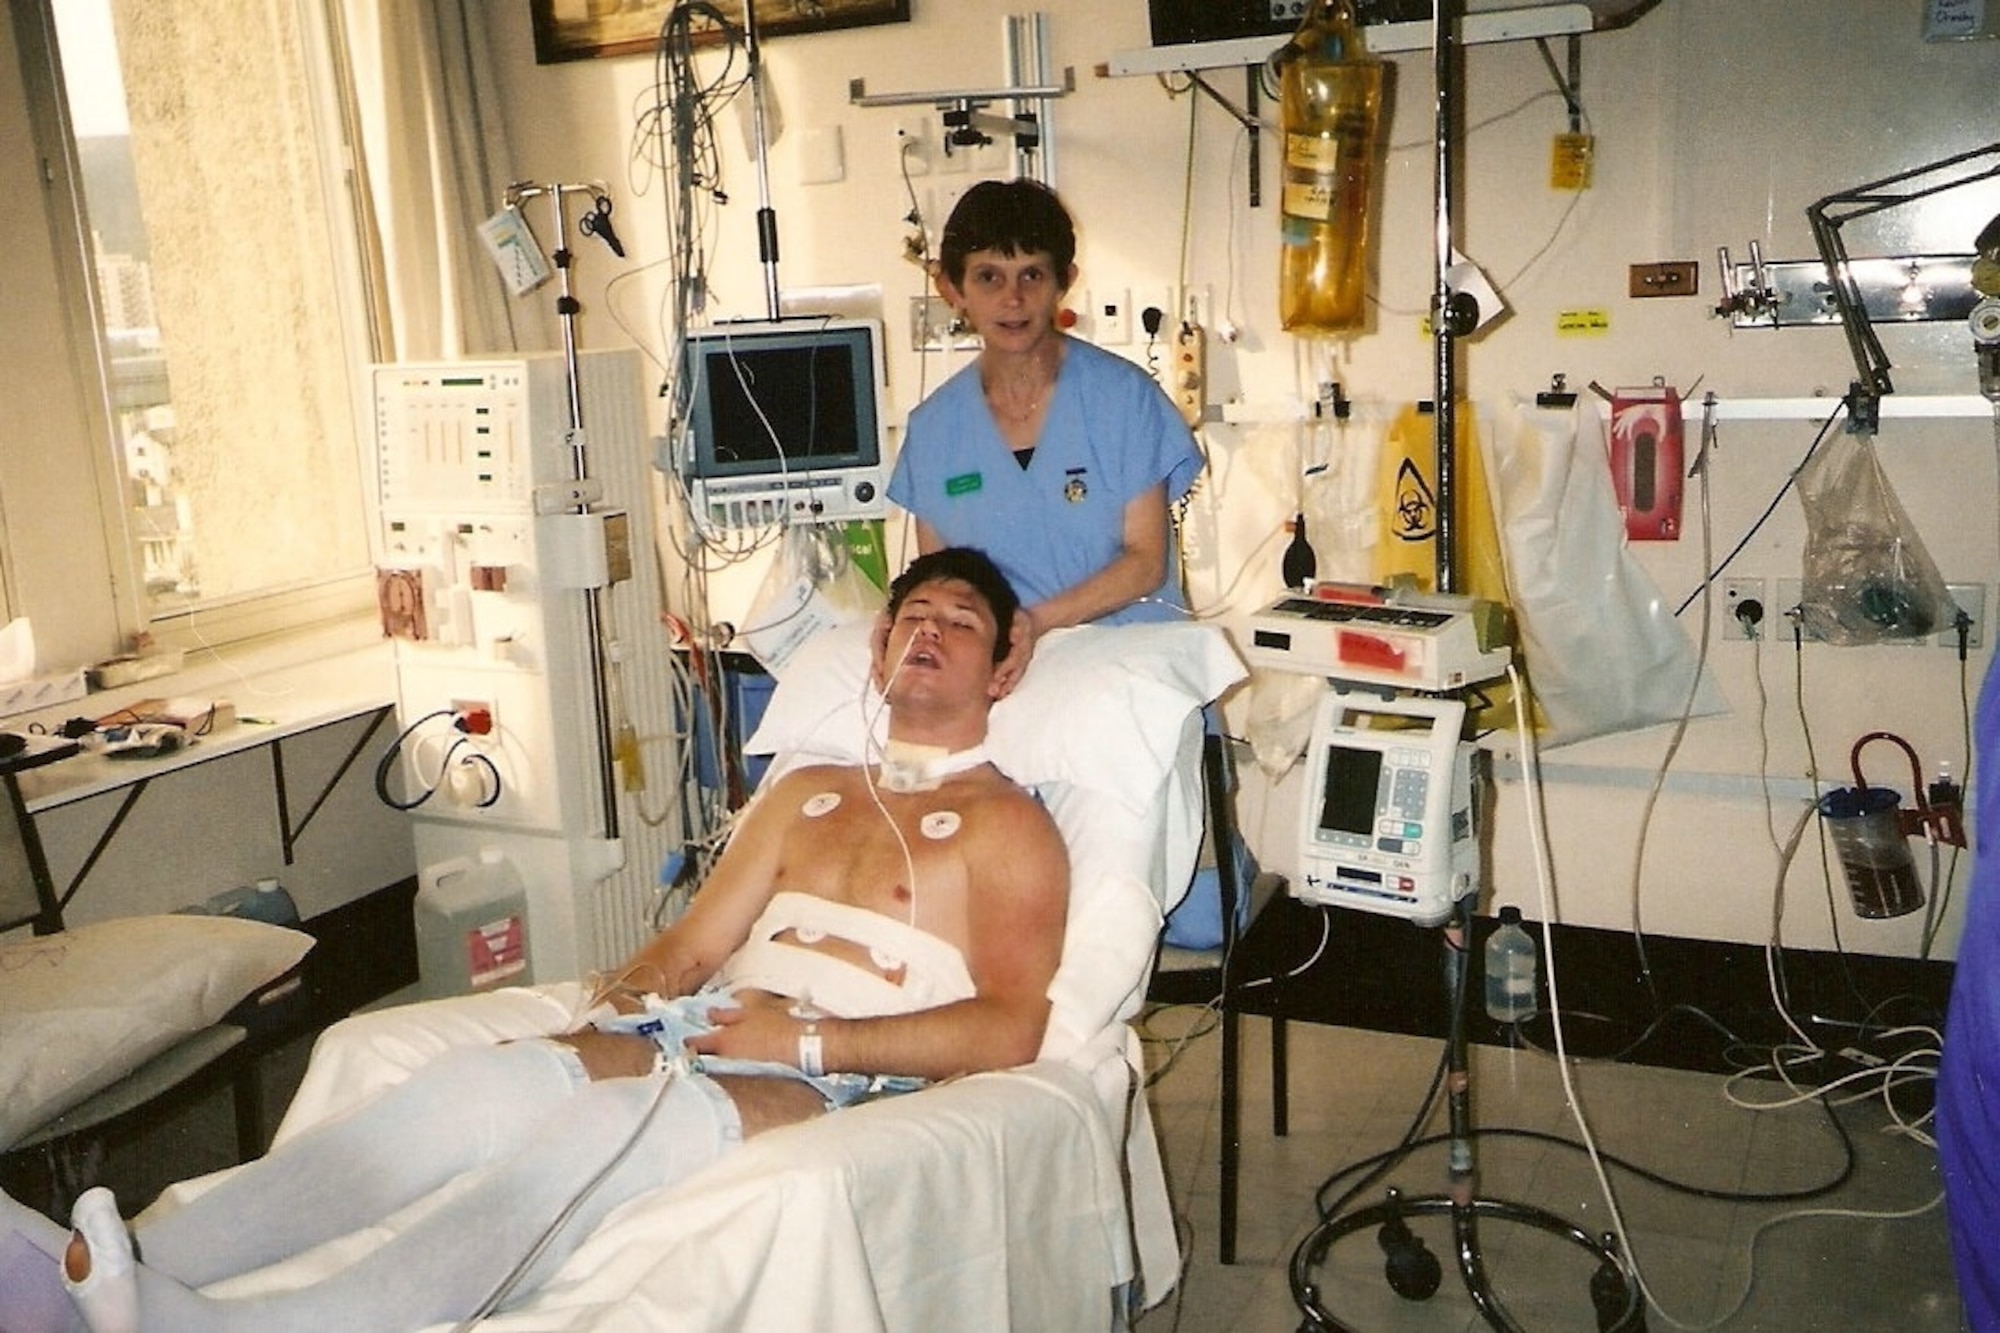 A nurse holds up Kevin Ormsby’s head at a hospital in New Zealand. Ormsby was found unconscious by members of the group he was skiing with after an accident on July 29, 2002. (Courtesy Photo)